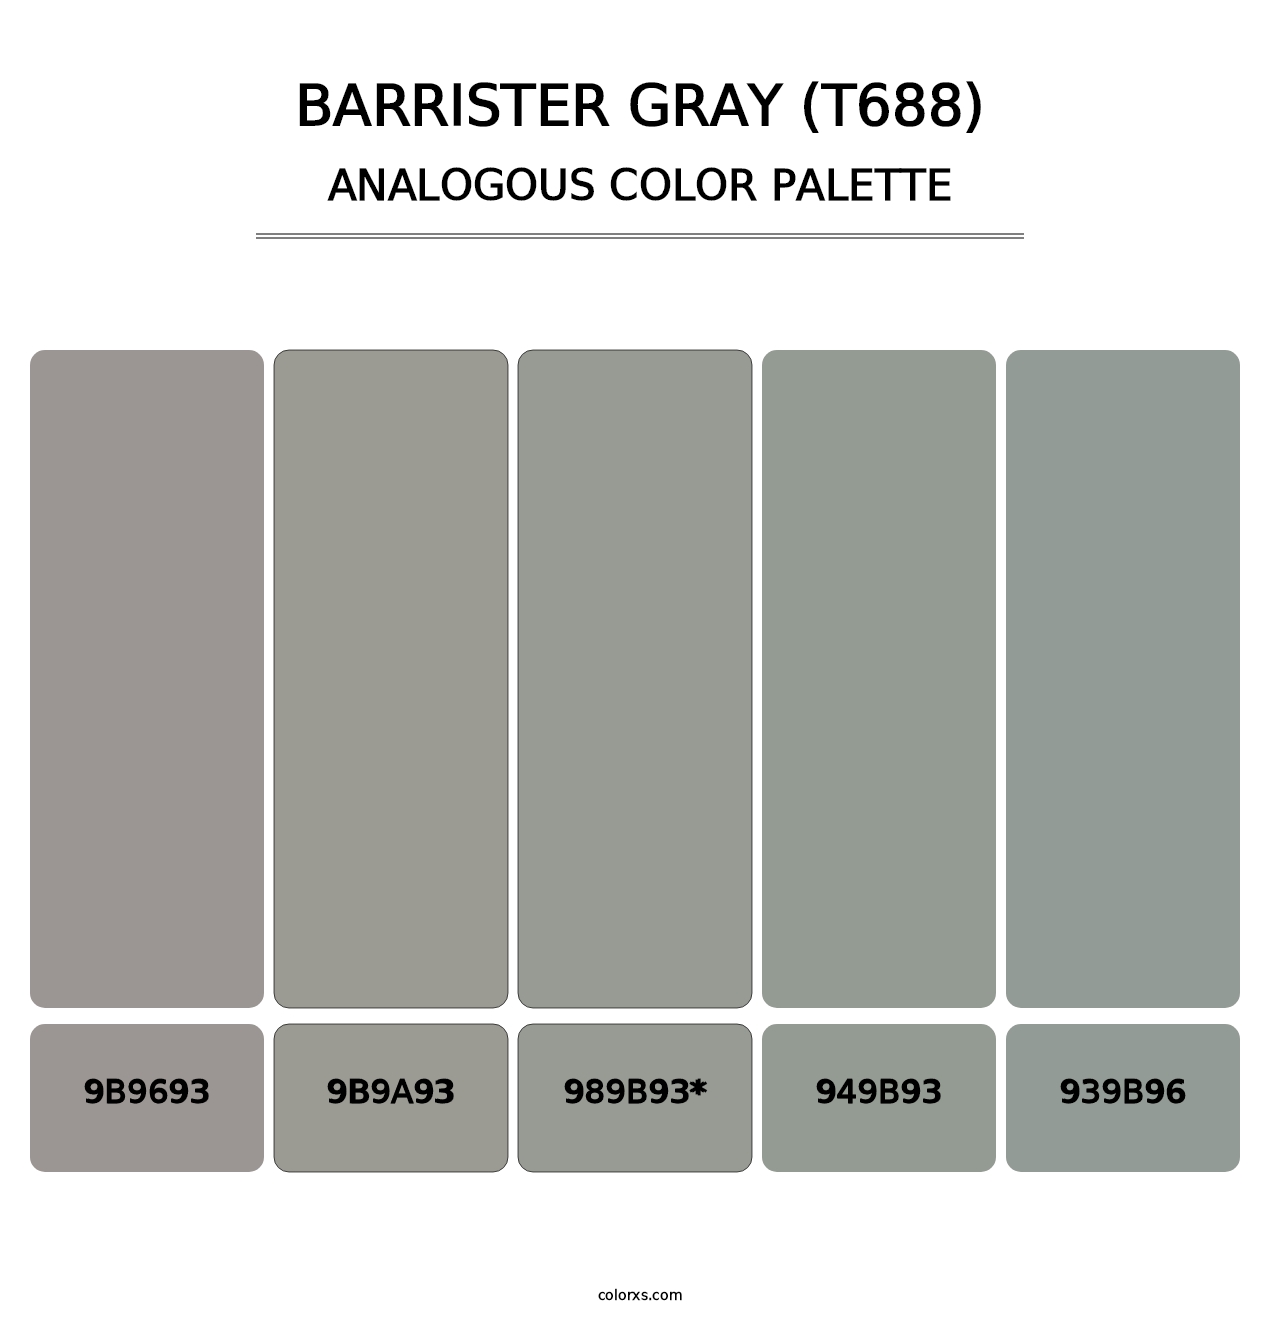 Barrister Gray (T688) - Analogous Color Palette